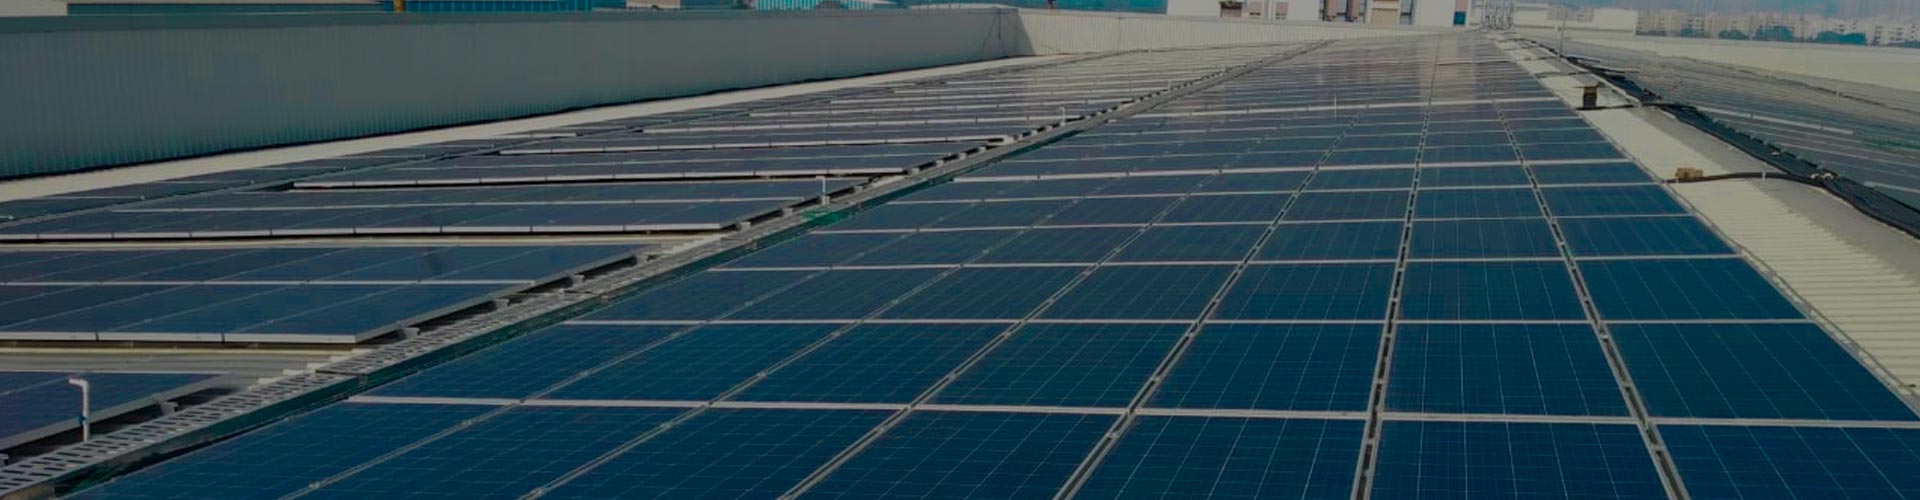 Jubilant Solar Power Plant by SunSource Energy, Greater Noida